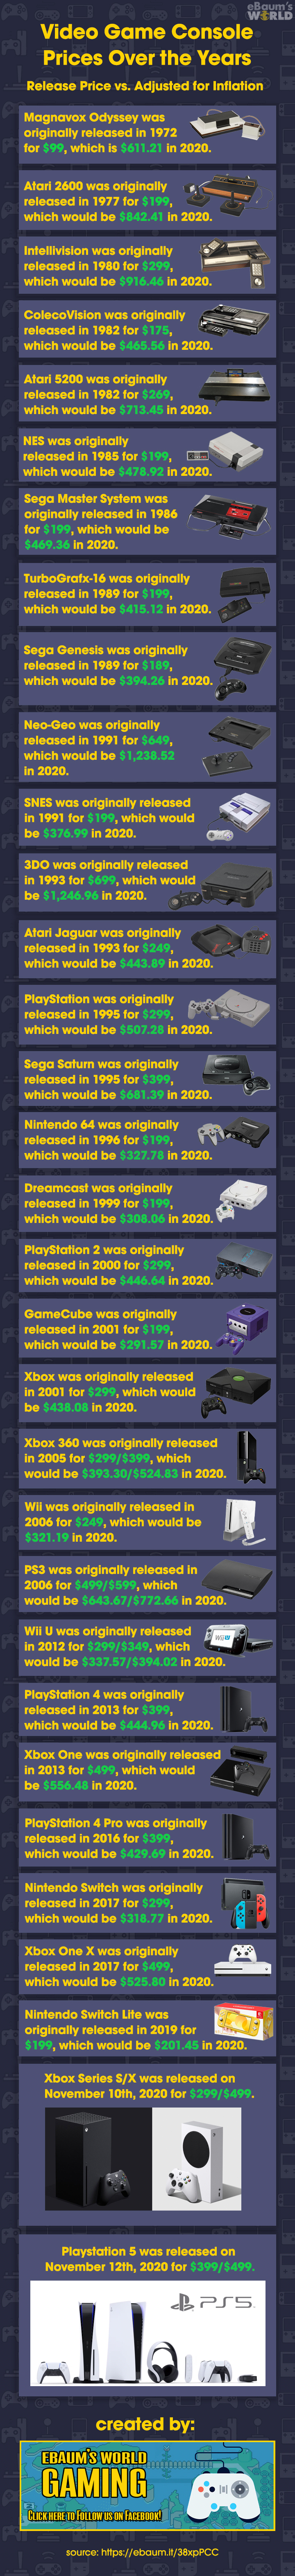 an infographic of video game consoles by list price and adjusted for inflation